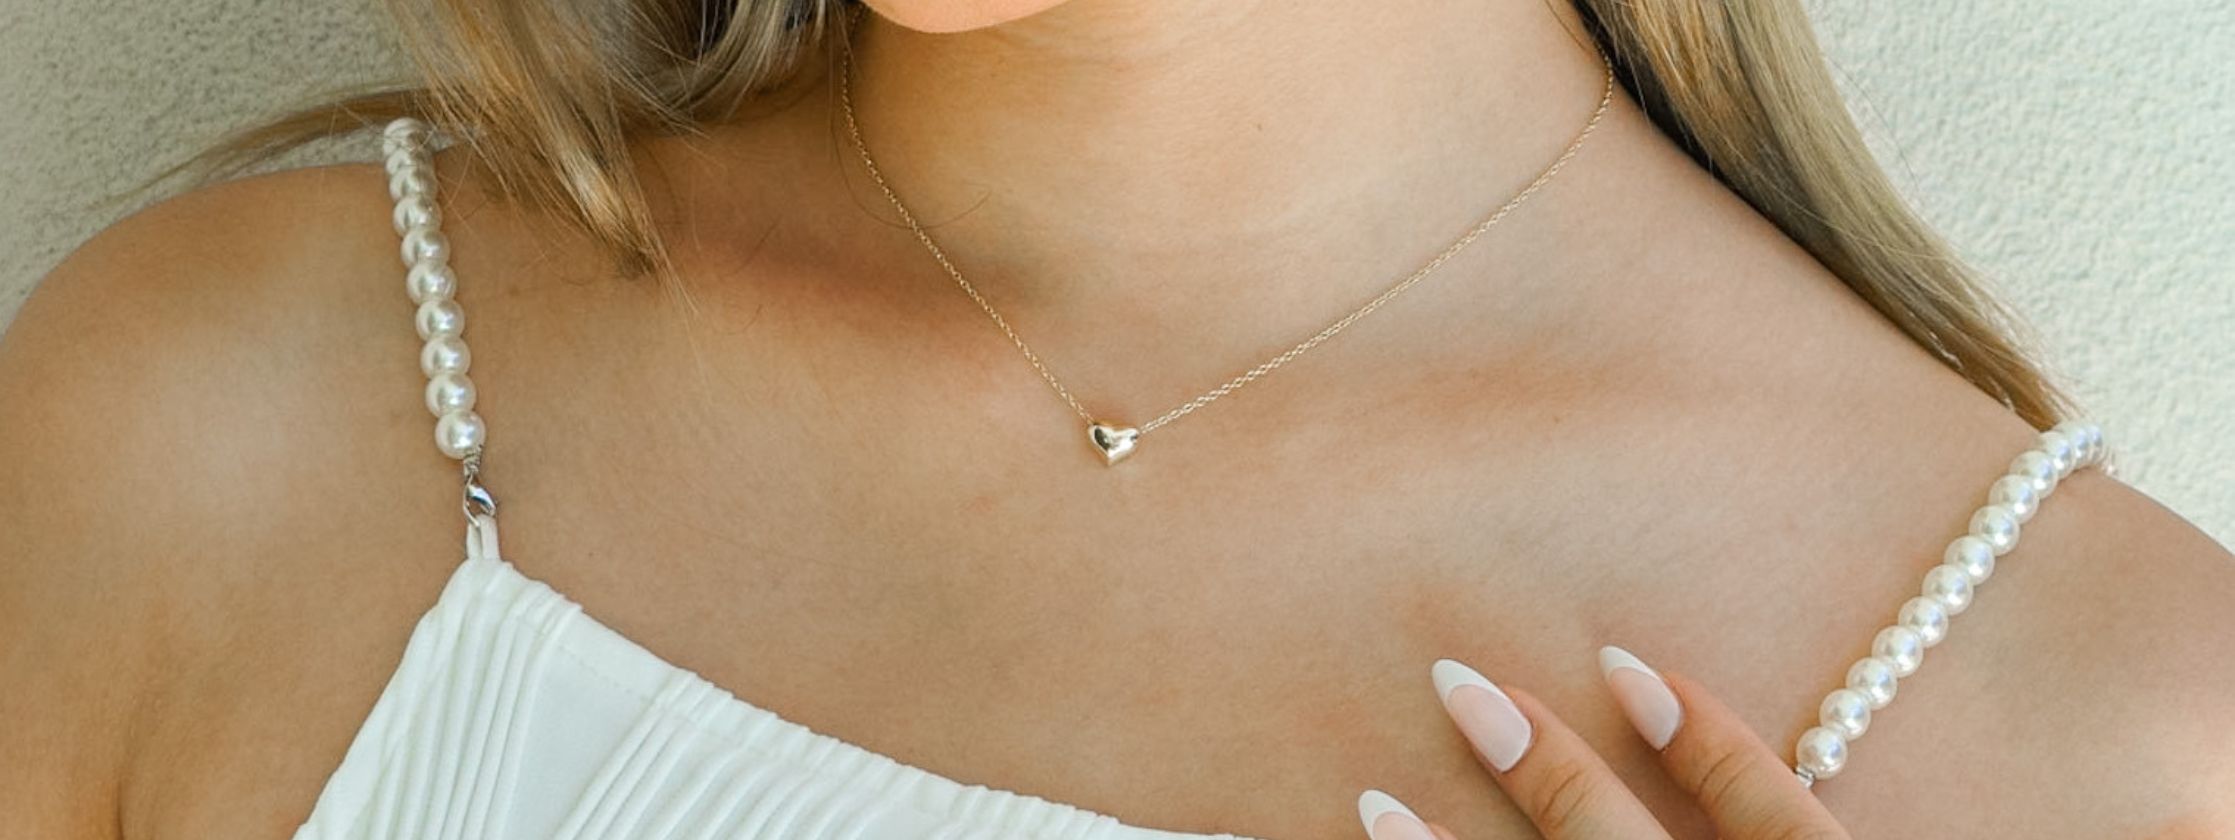 what is dainty jewellery, dainty jewellery meaning